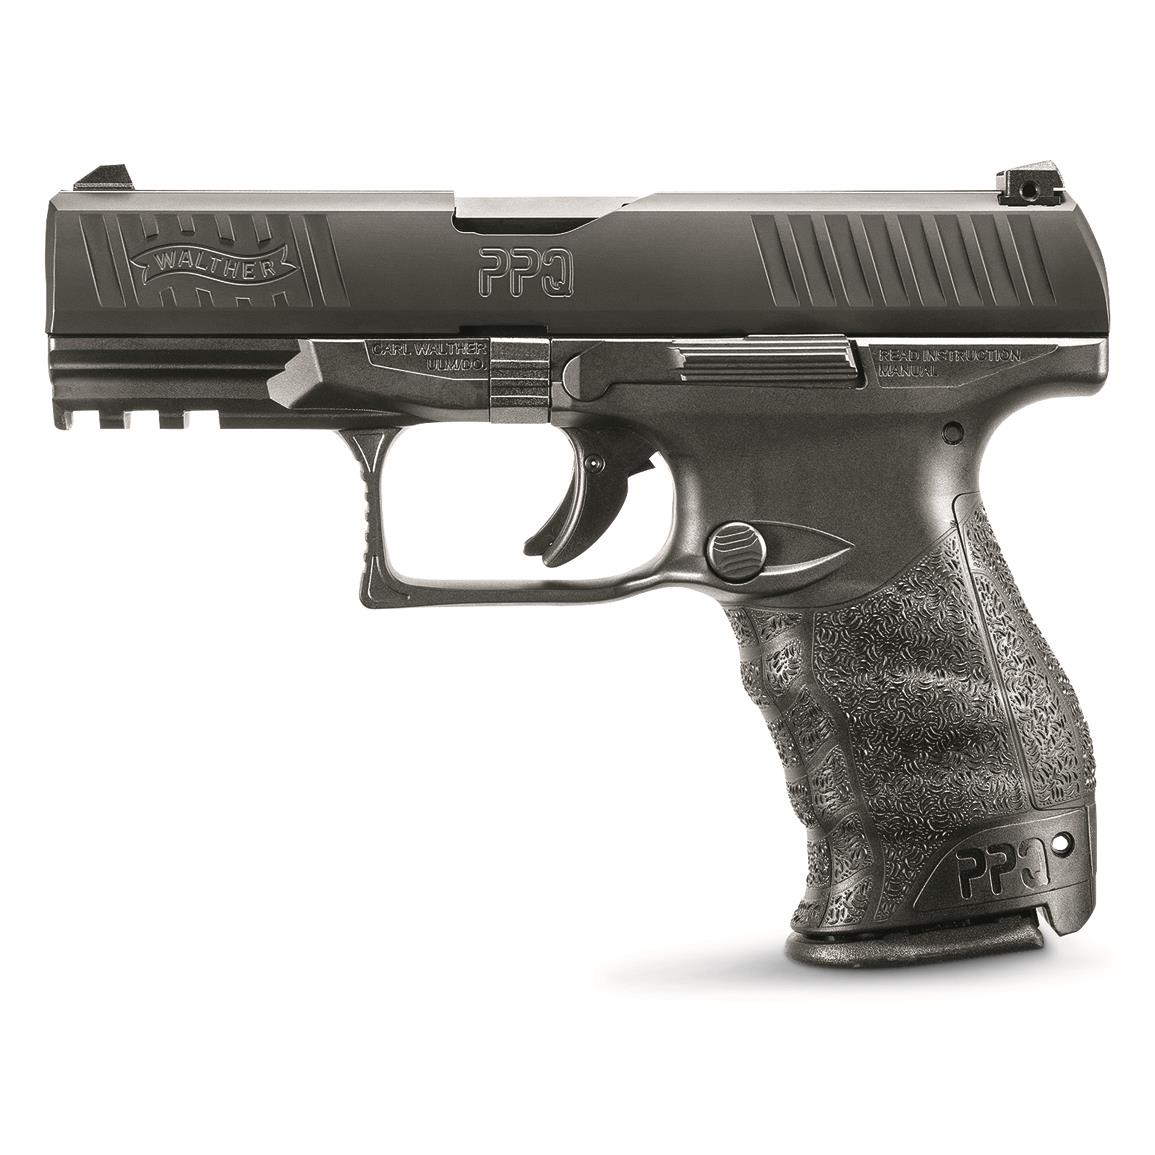 Walther PPQ M2 .177 cal. CO2 Air Pistol